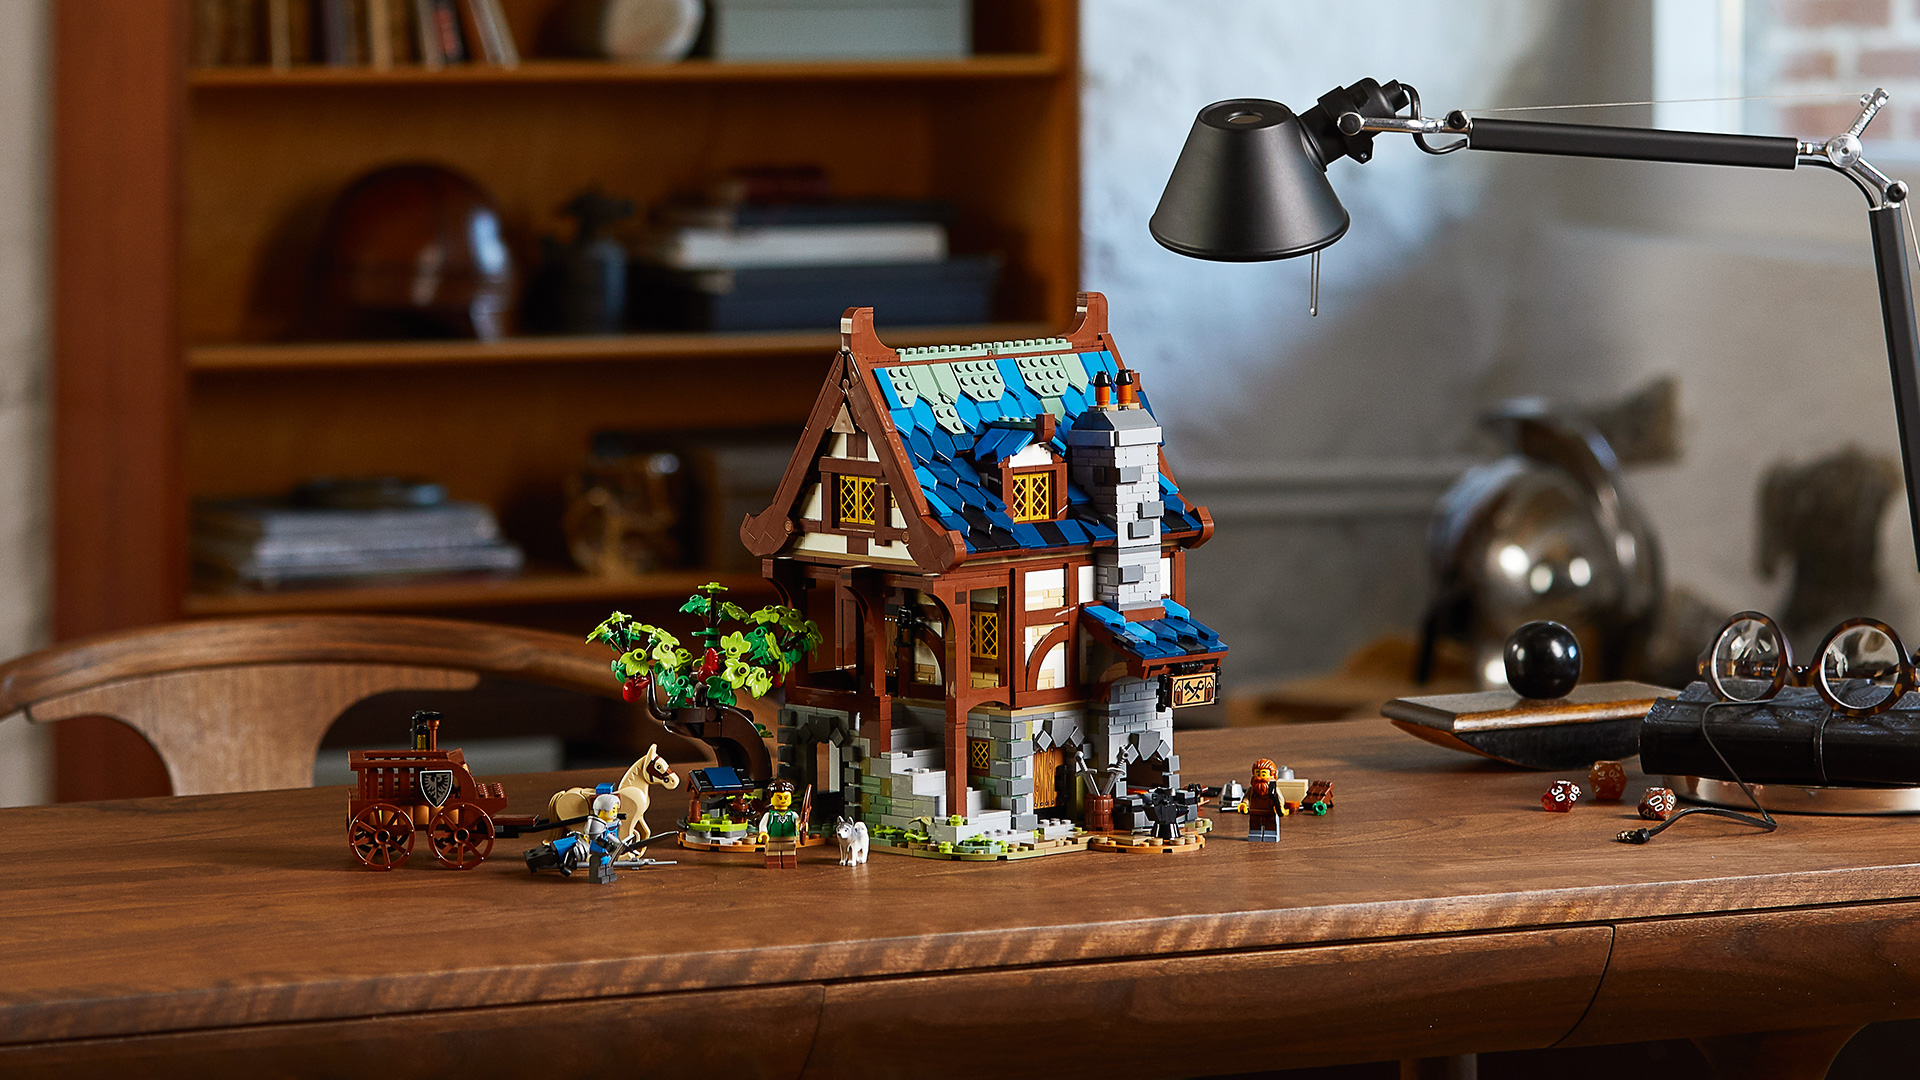 LEGO 21325 - LEGO Ideas Medieval Blacksmith  LEGO Ideas has taken a leaf out of the history books with the design of its latest set, a charming Medieval Blacksmith’s house. The new set is based on an original design by an avid LEGO builder, which achieved over 10,000 votes from LEGO fans worldwide – giving it the green light to go into production.   •Age – 18+ •Model measures: oHeight: 27cm/10.5in. oWidth: 27cm/10.5in. oDepth: 21cm/8in. •2,164 pieces •Magnificently detailed and architecturally accurate medieval blacksmith’s building and garden for display. •Includes a glowing blacksmith forge and a horse figure pulling a buildable cart Four Minifigures, including two new-for-March-2021 Black Falcon Knights. • Easily accessible, three-level building with a bedroom, kitchen and workshop packed with accessory elements such as tools, coal and armour.